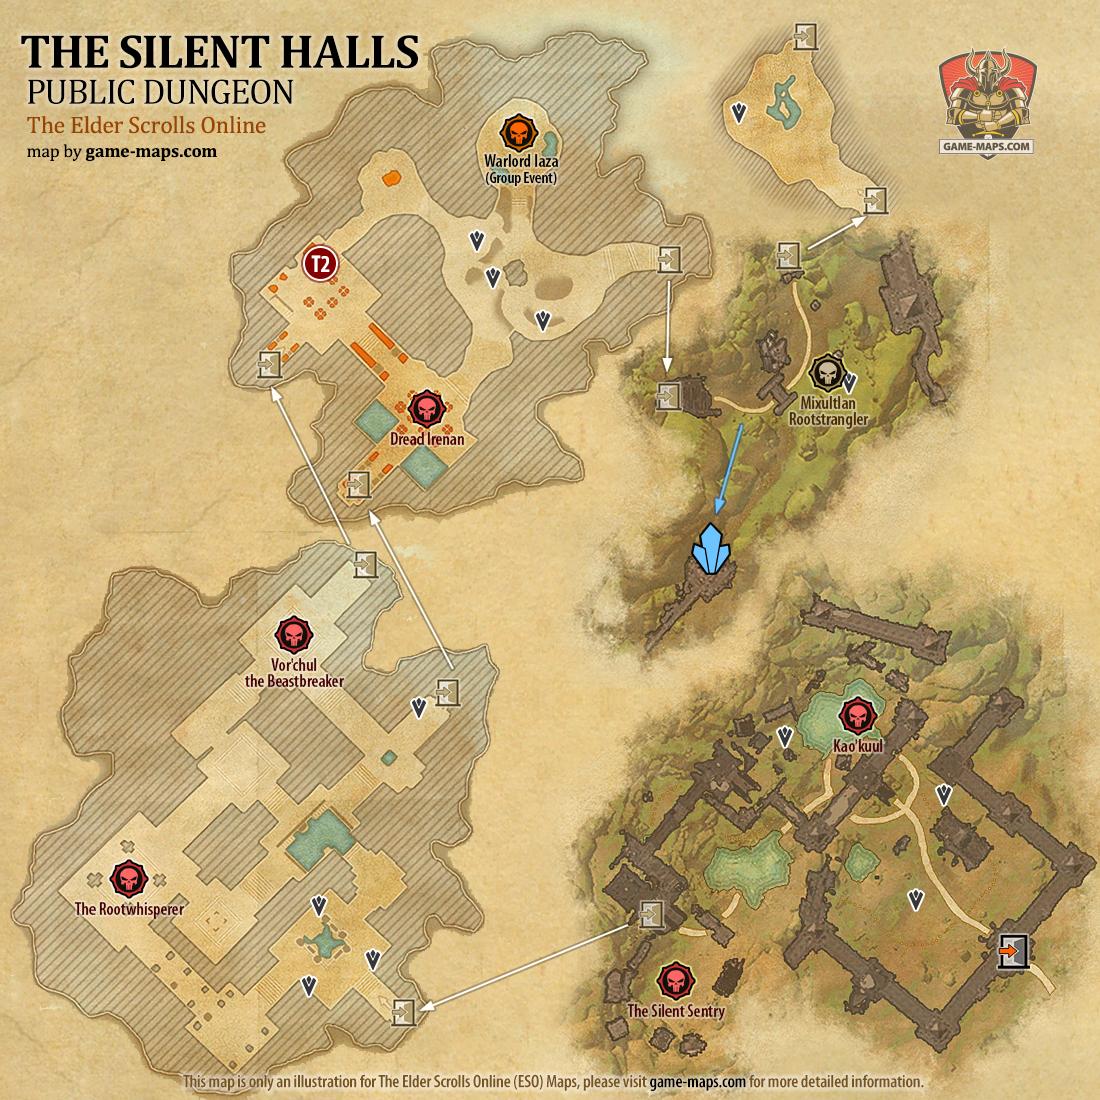 Map of The Silent Halls Public Dungeon located in Blackwood ESO with Skyshard and Bosses.